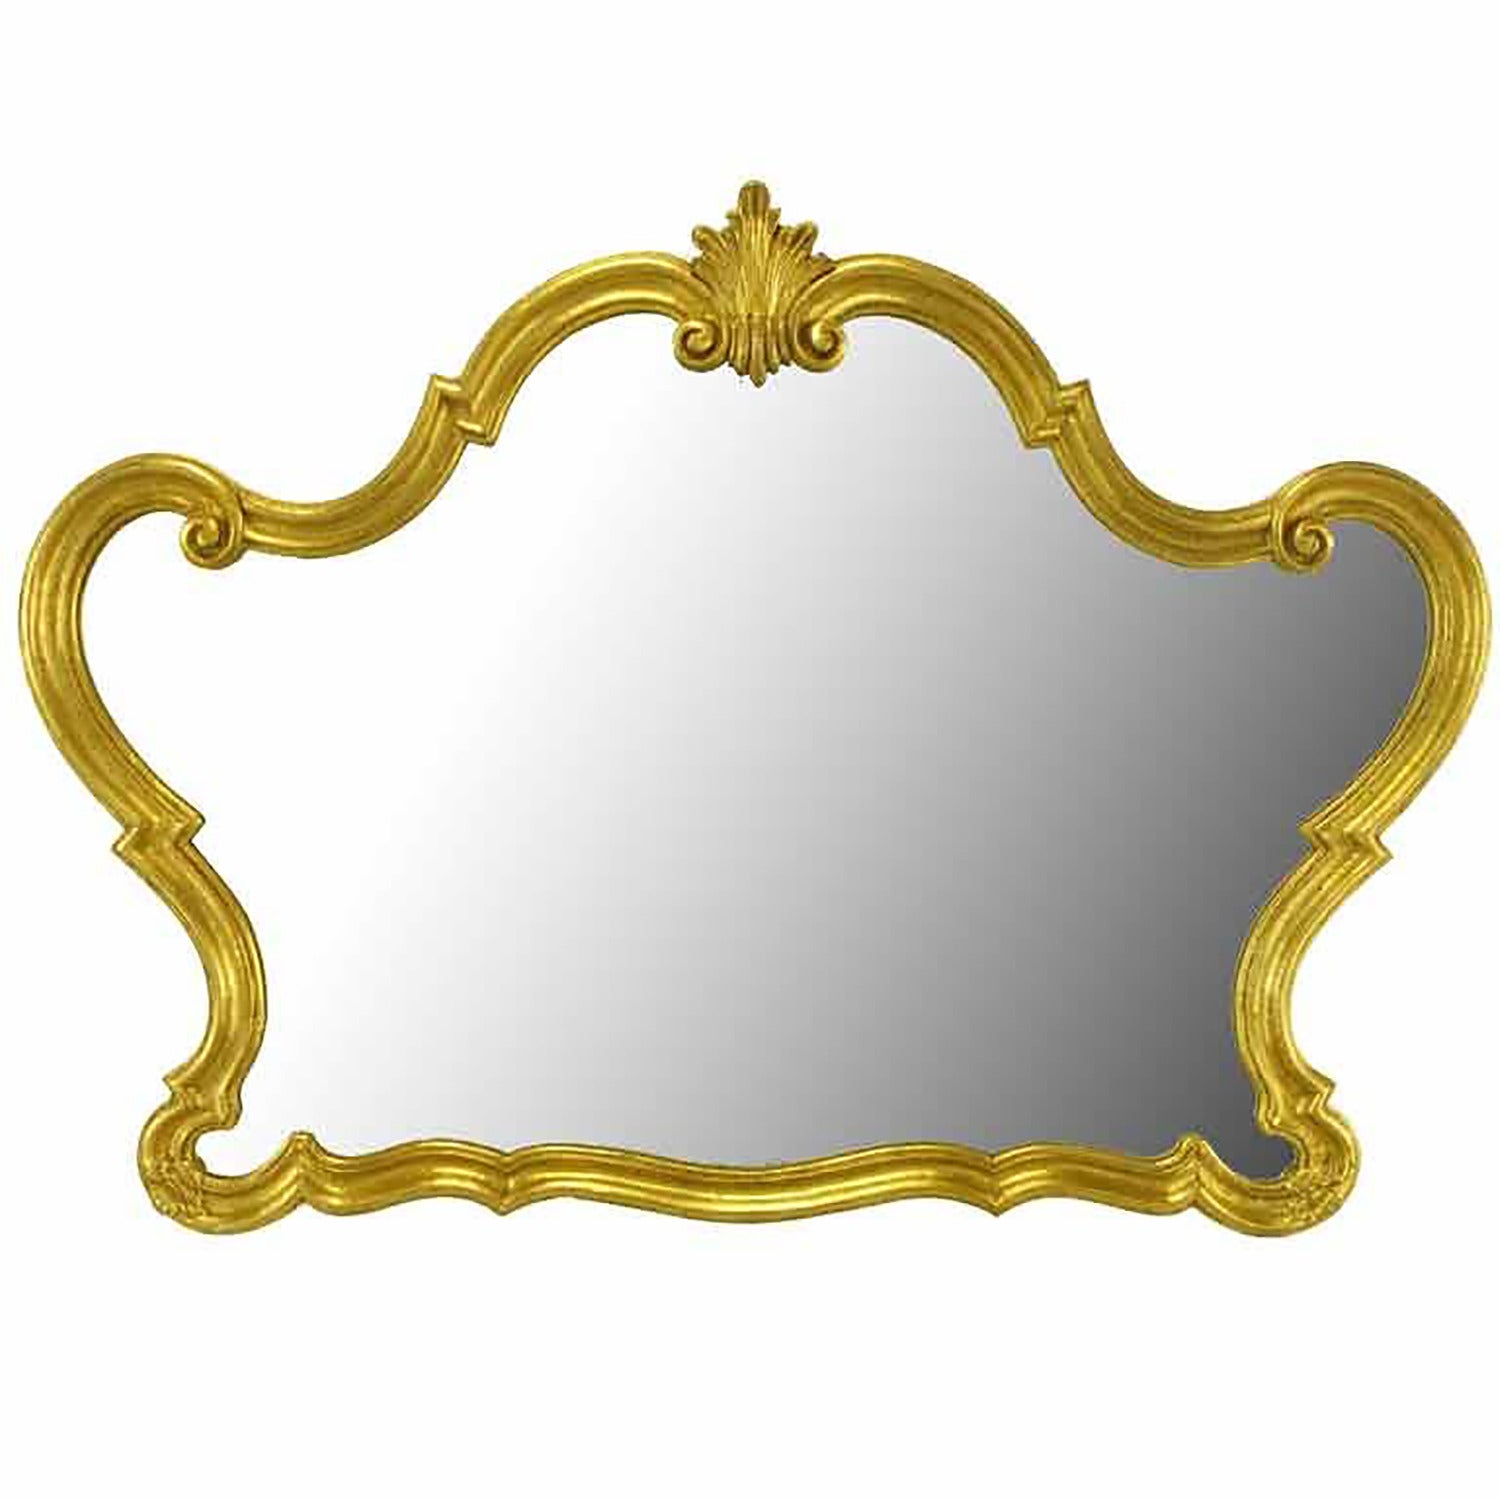 Italian Gilt Composite Wood and Gesso Rococo Wall Mirror by Florentia